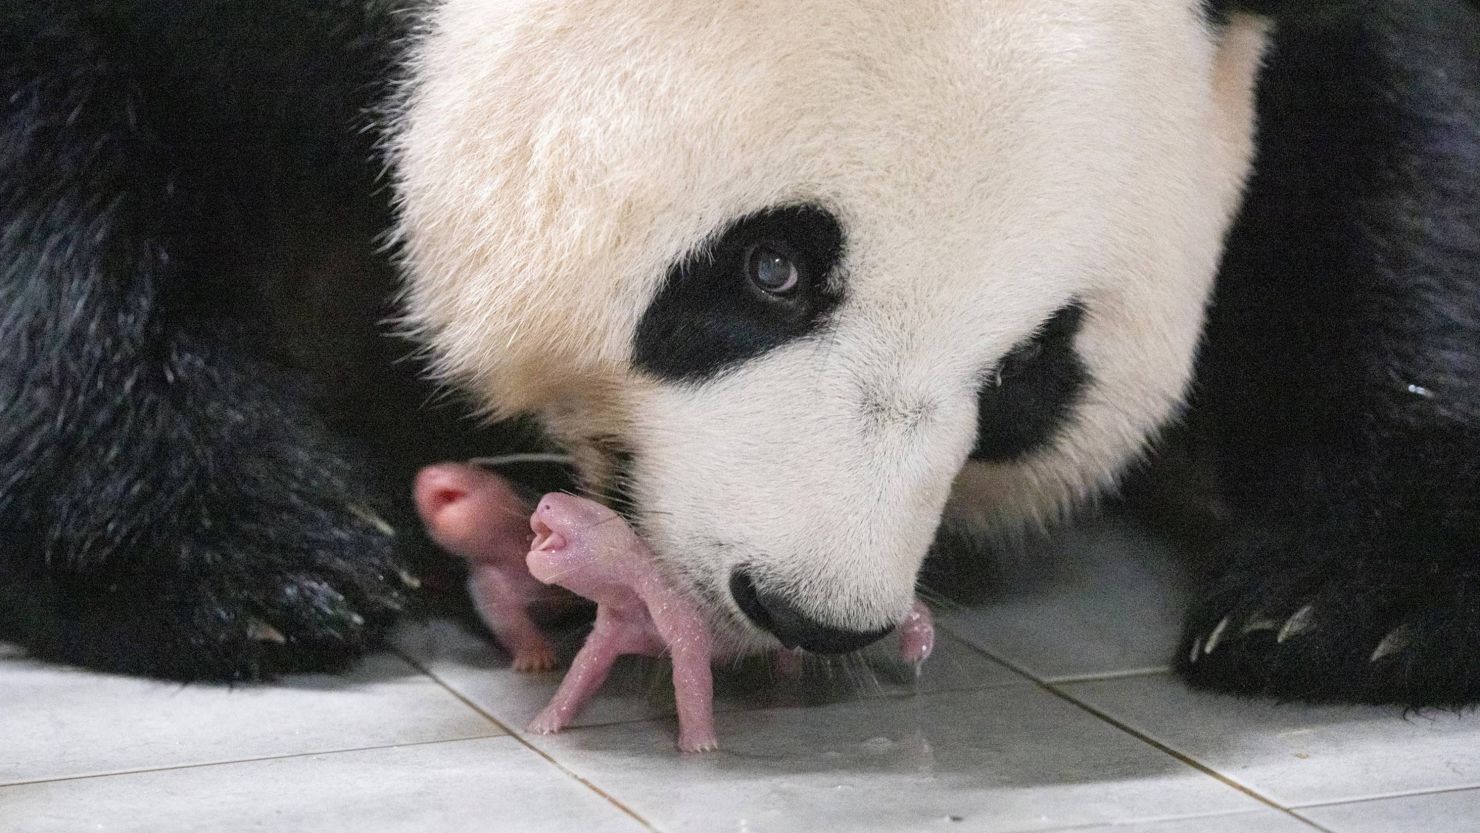 Giant Panda Ai Bao holds one of the newborn twin cubs in her mouth at Everland amusement park in South Korea.